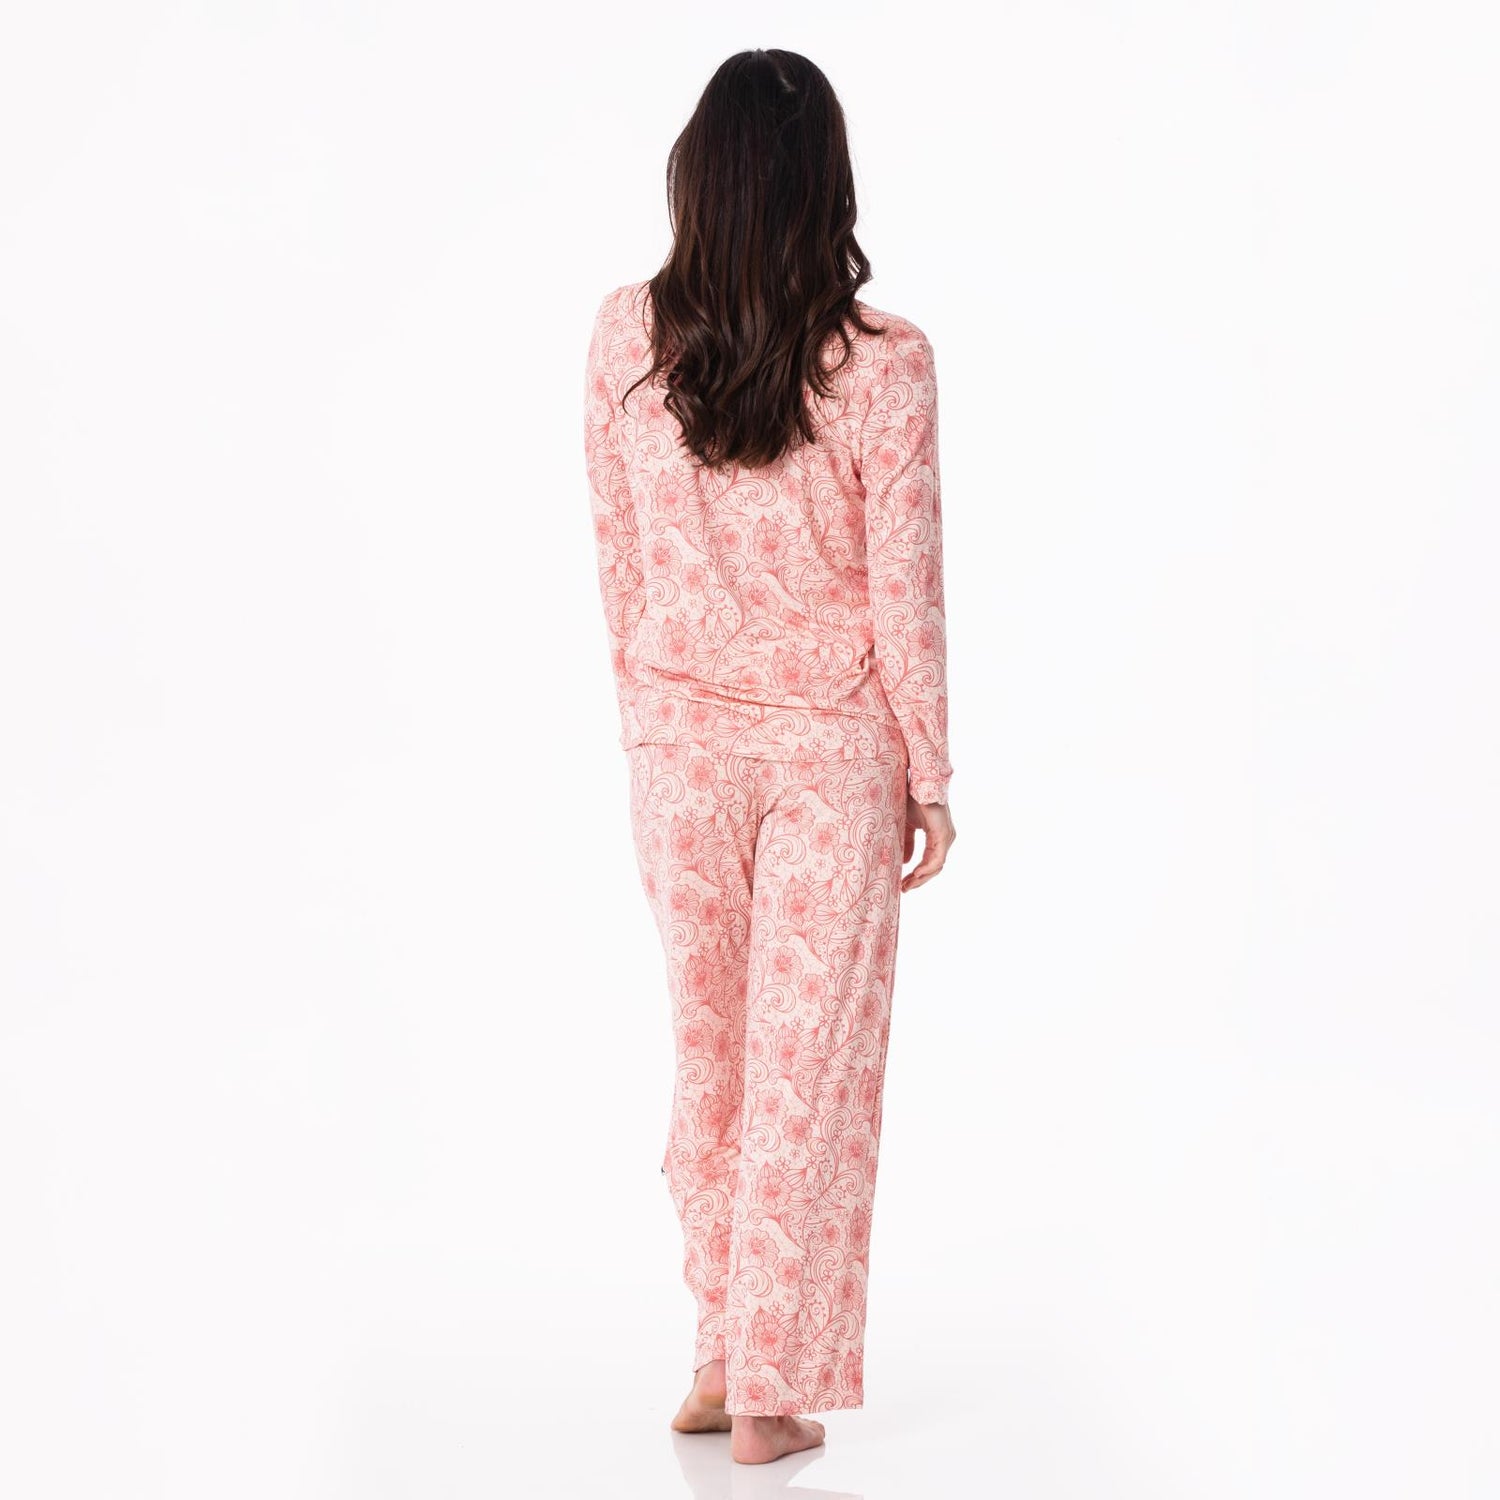 Women's Print Long Sleeve Collared Pajama Set in Peach Blossom Lace